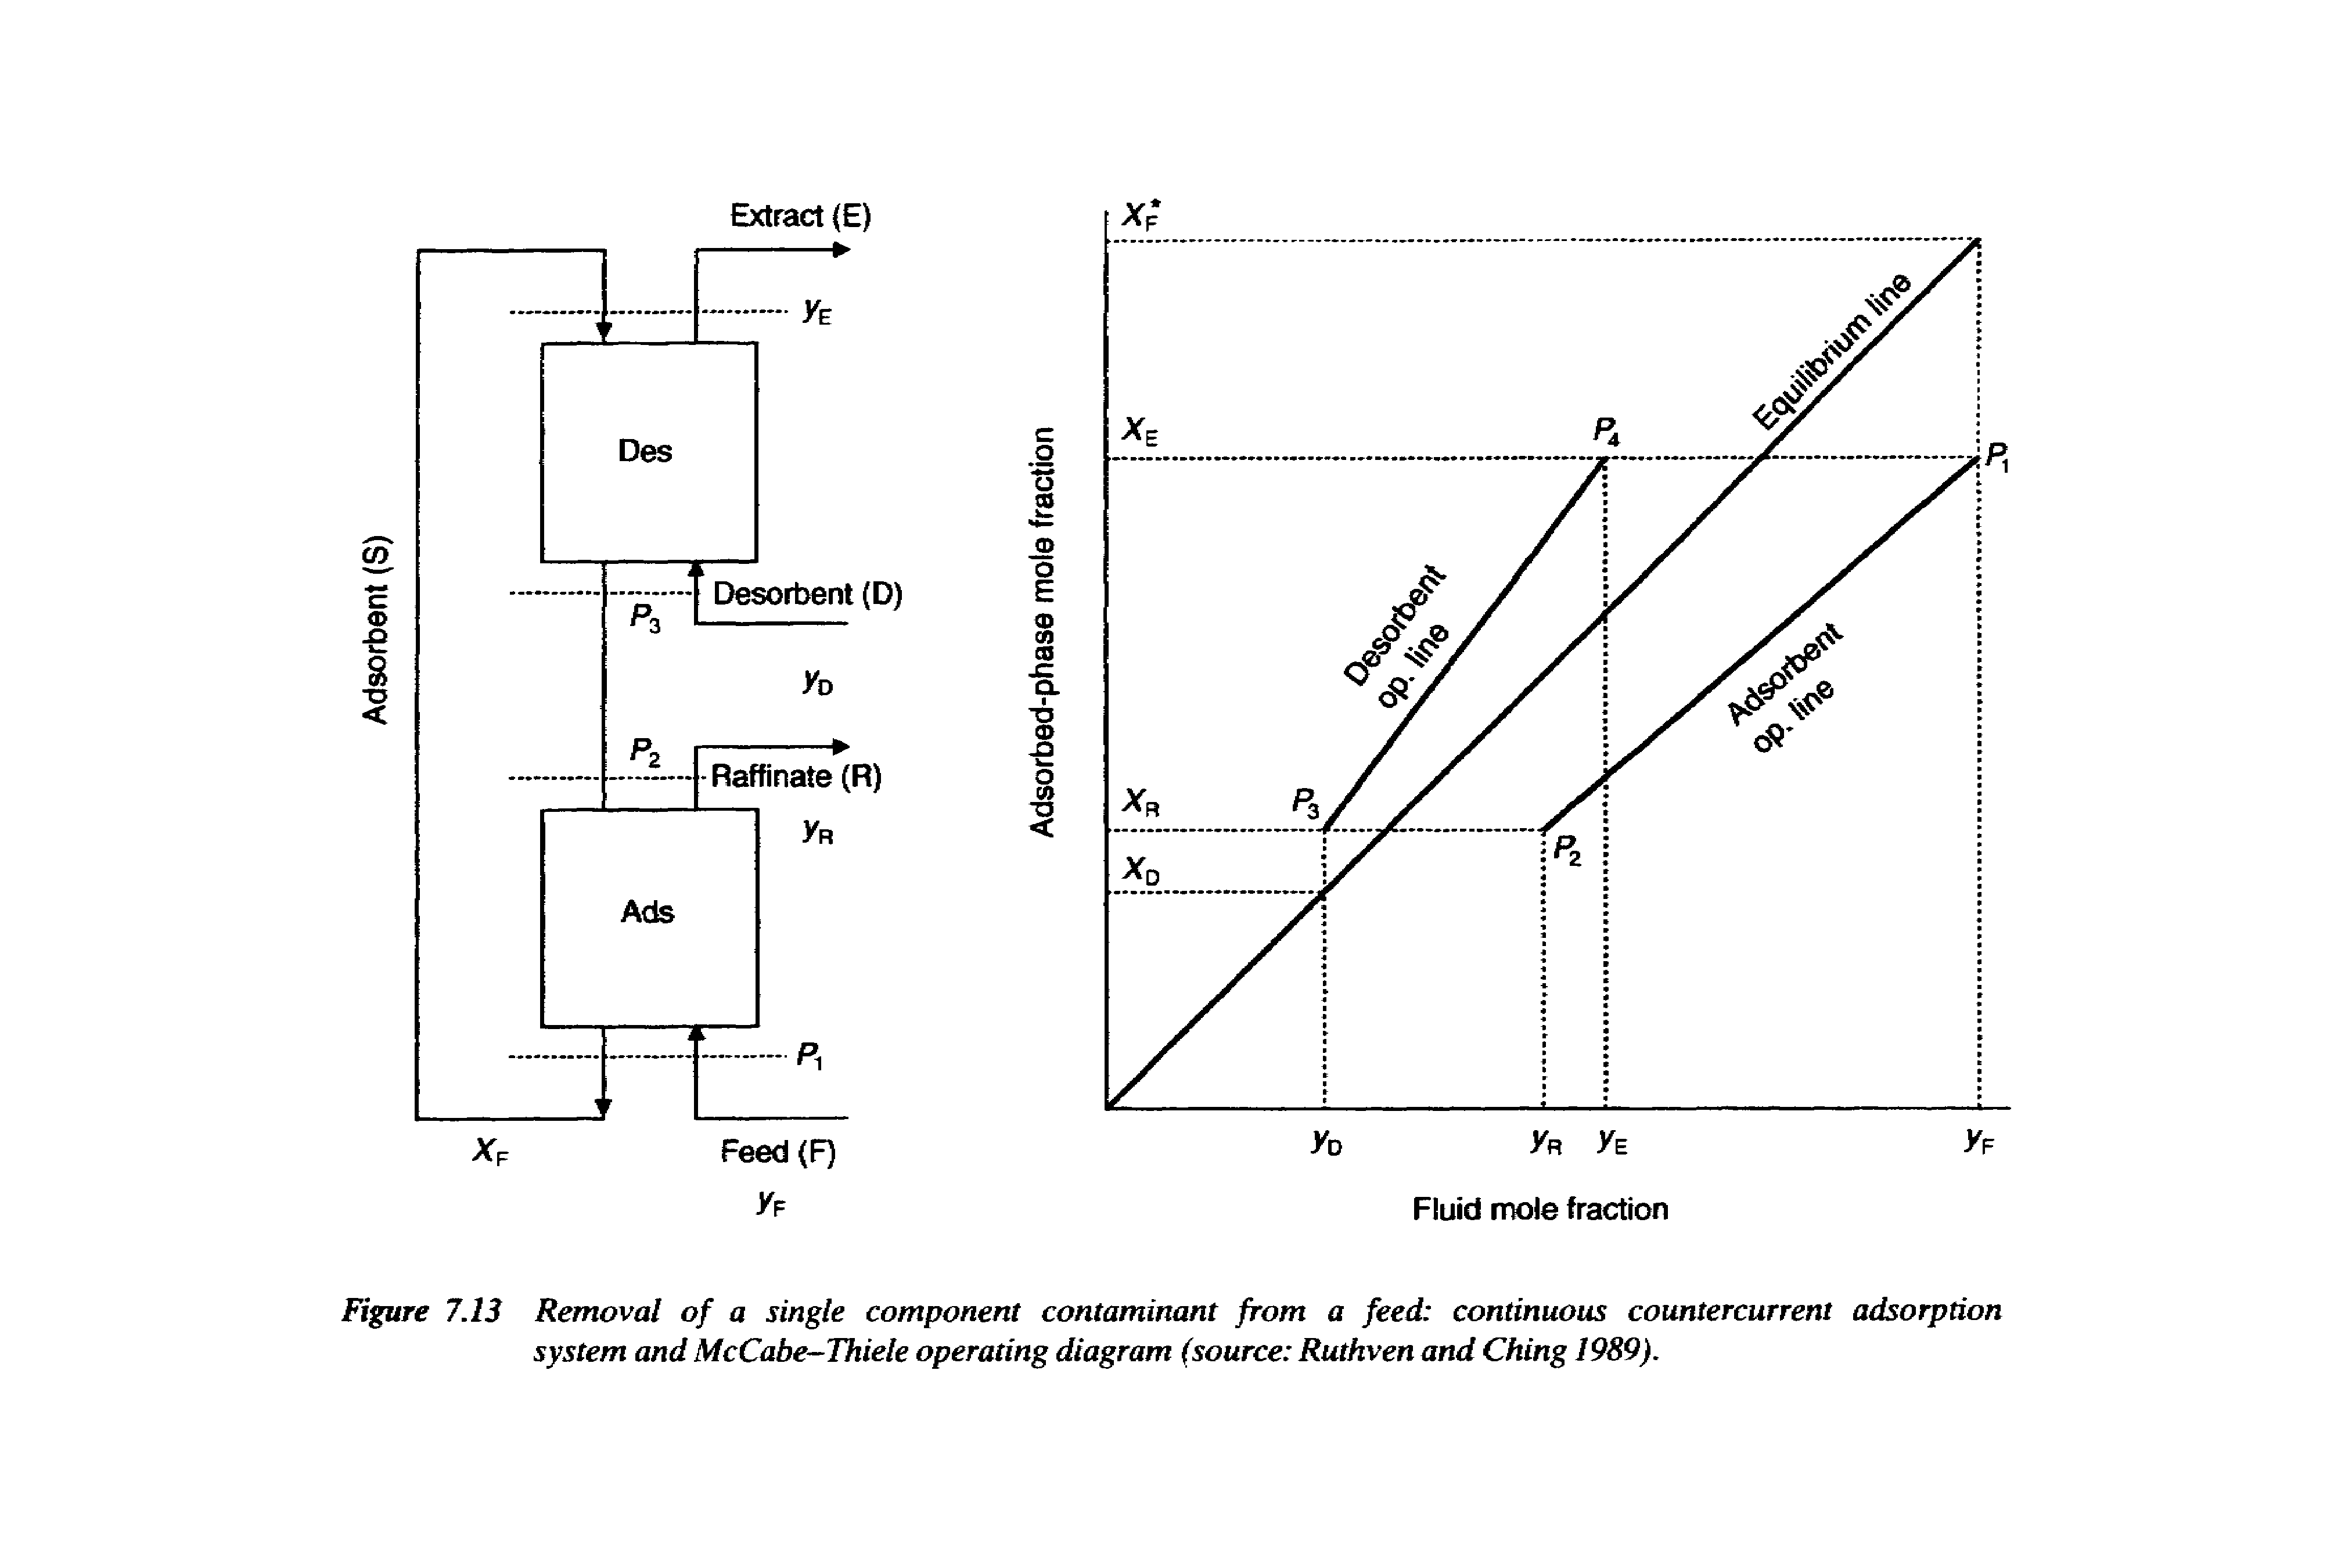 Figure 7.13 Removal of a single component contaminant from a feed continuous countercurrent adsorption system and McCabe-Thiele operating diagram (source Ruthven and Ching 1989).